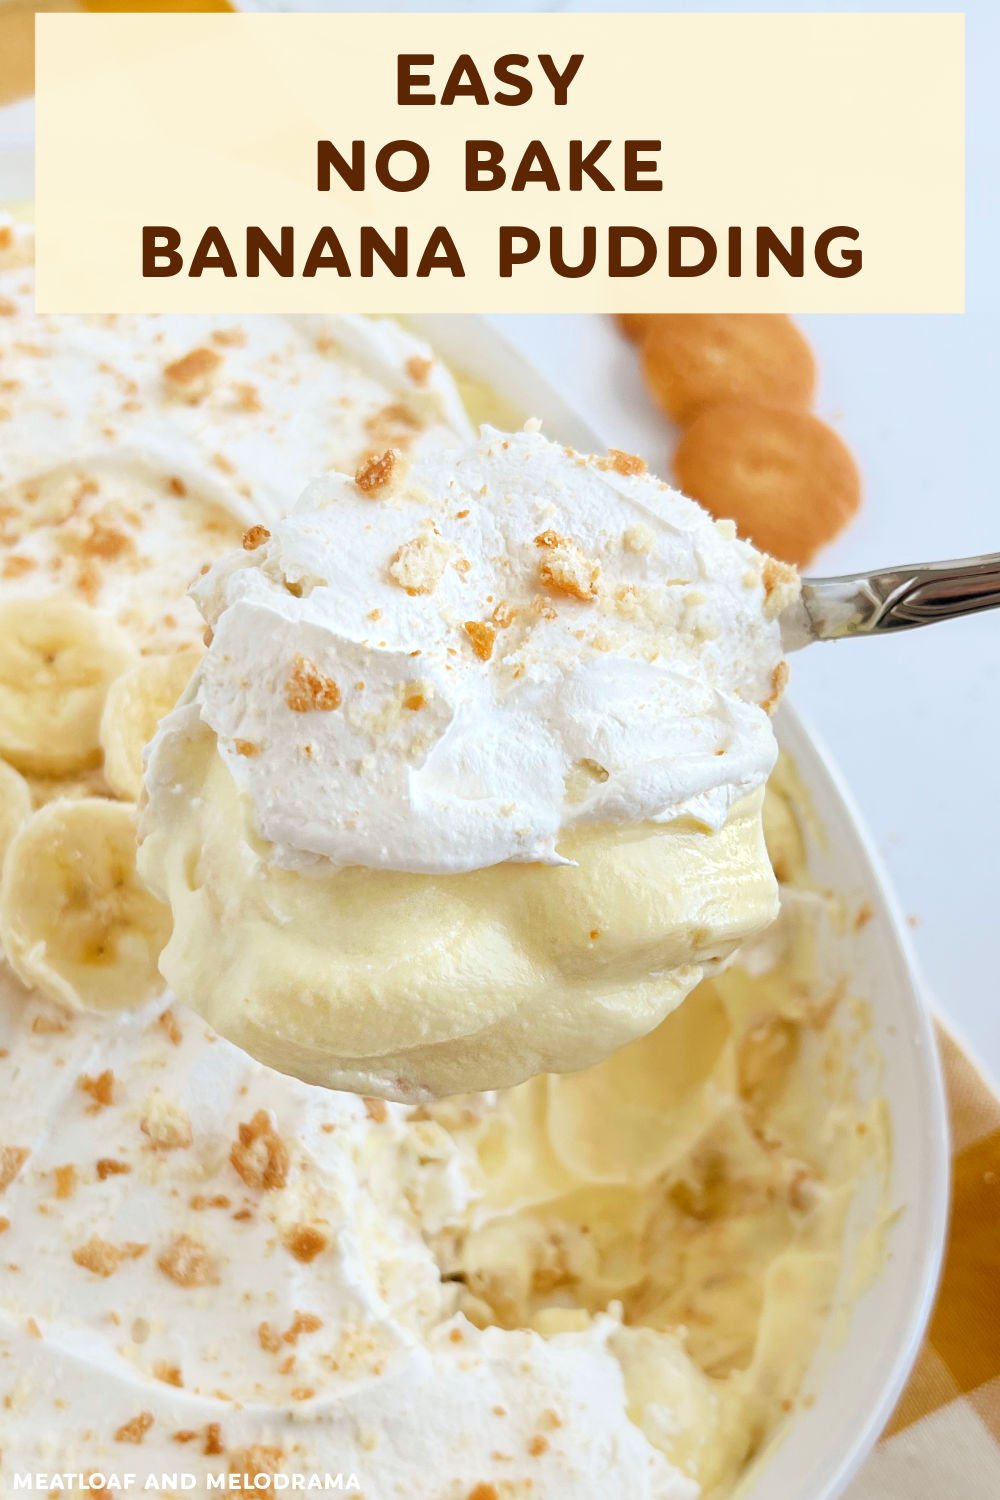 This No Bake Banana Pudding recipe with Cool Whip and Nilla Wafer cookies is an easy no bake dessert made with simple ingredients. The perfect dessert for holidays, special occasions, family gatherings and potluck dinners! via @meamel